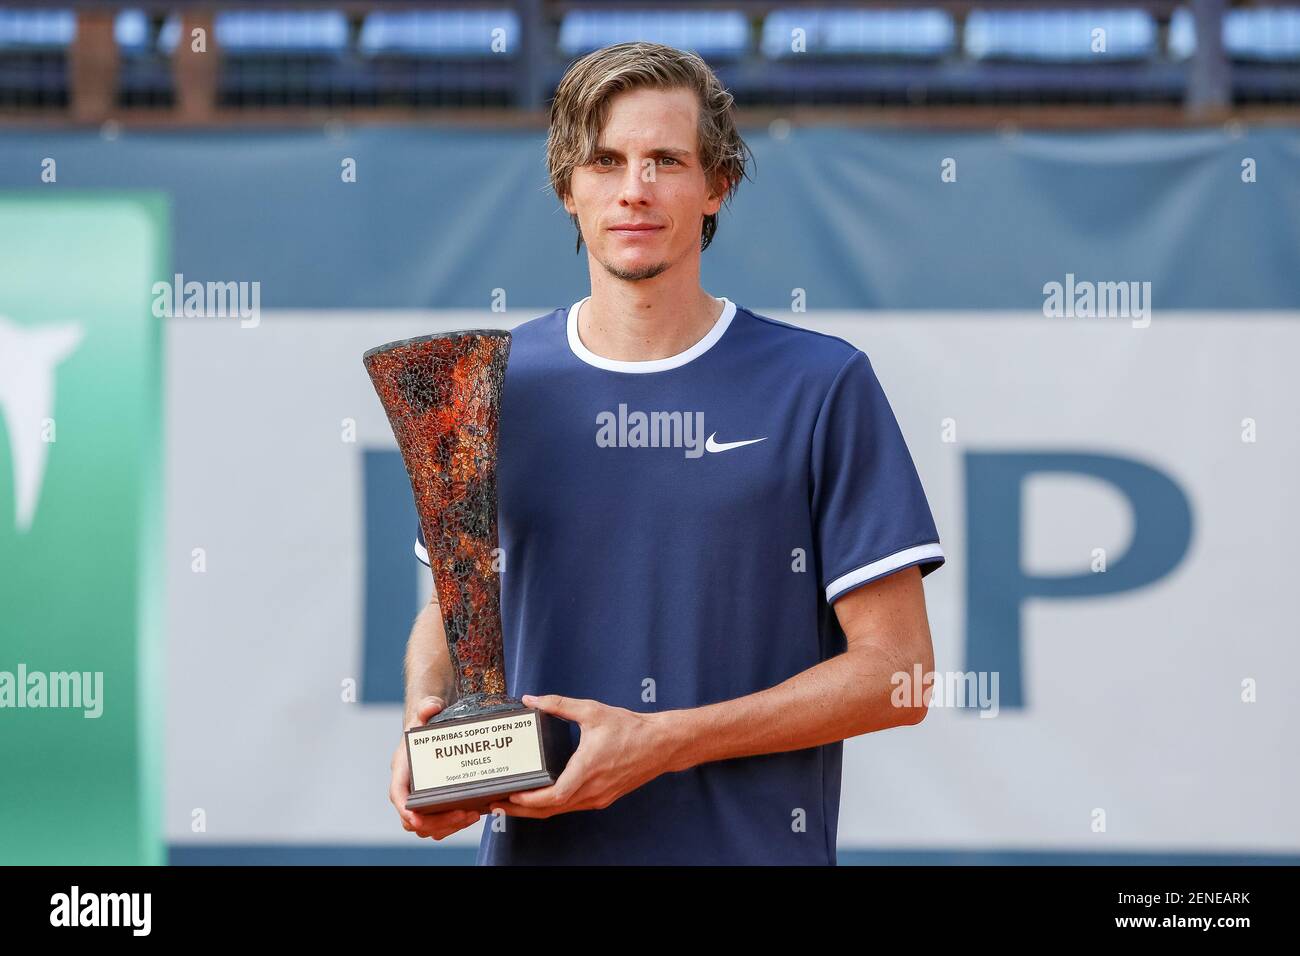 Filip Horansky (SVK) seen posing with his trophy after the final match between Stefano Travaglia (ITA) and Filip Horansky (SVK) at the Tennis ATP Challenger BNP Paribas Sopot Open